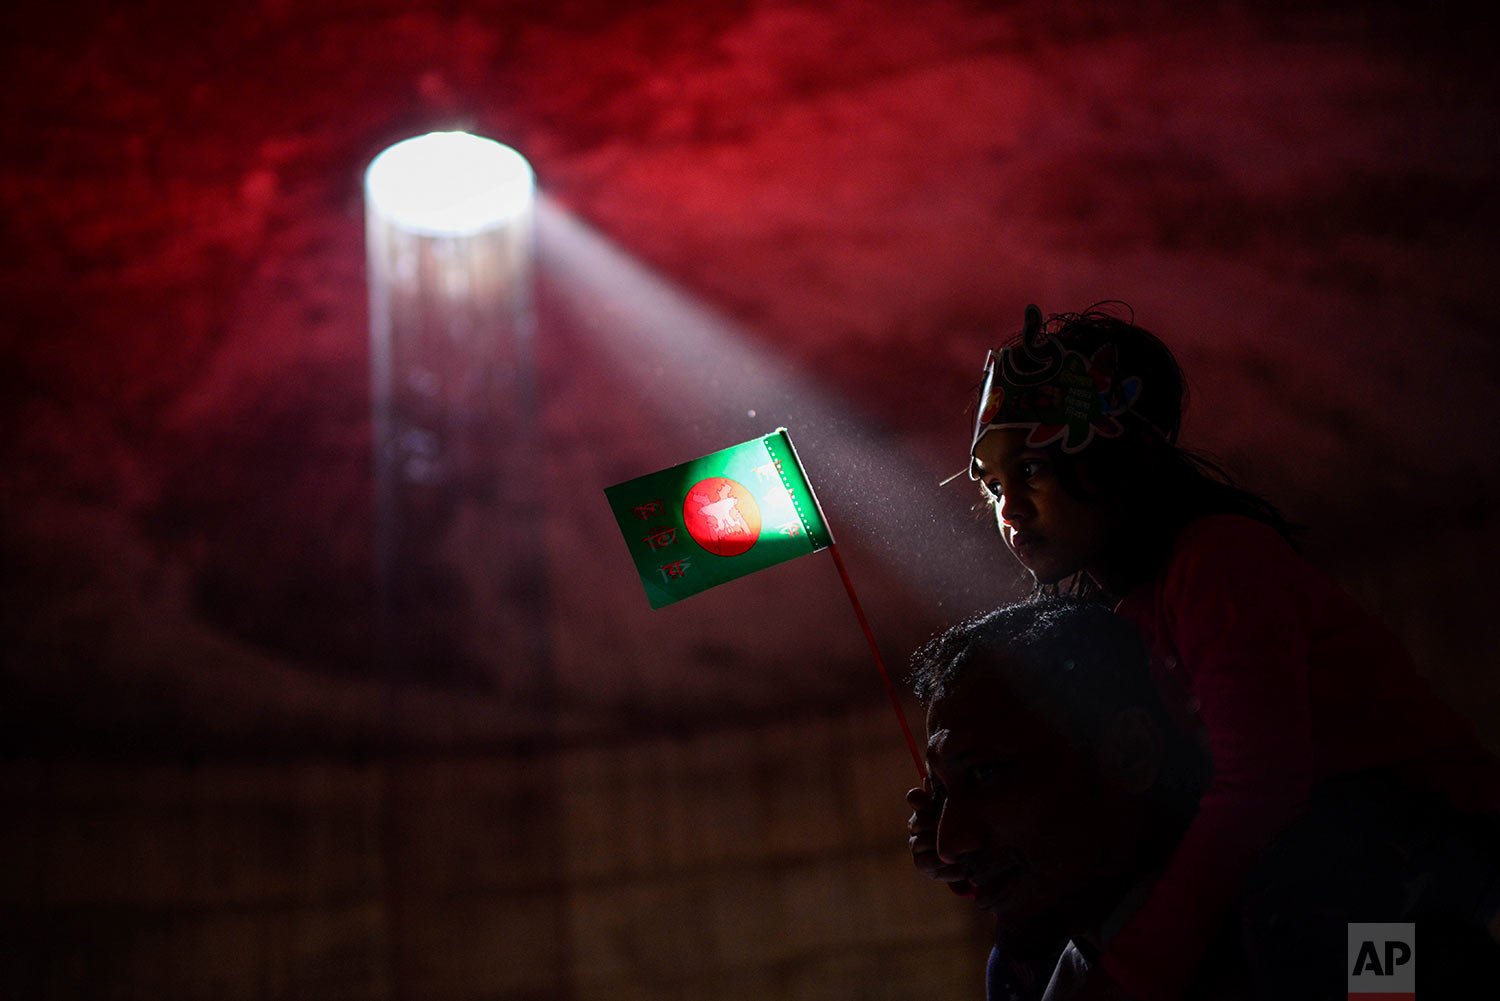  A Bangladeshi man carries his granddaughter holding their national flag inside the Museum of Independence during celebrations to mark 50 years of victory over Pakistan, at an event in Dhaka, Bangladesh, Thursday, Dec. 16, 2021.  (AP Photo/Mahmud Hos